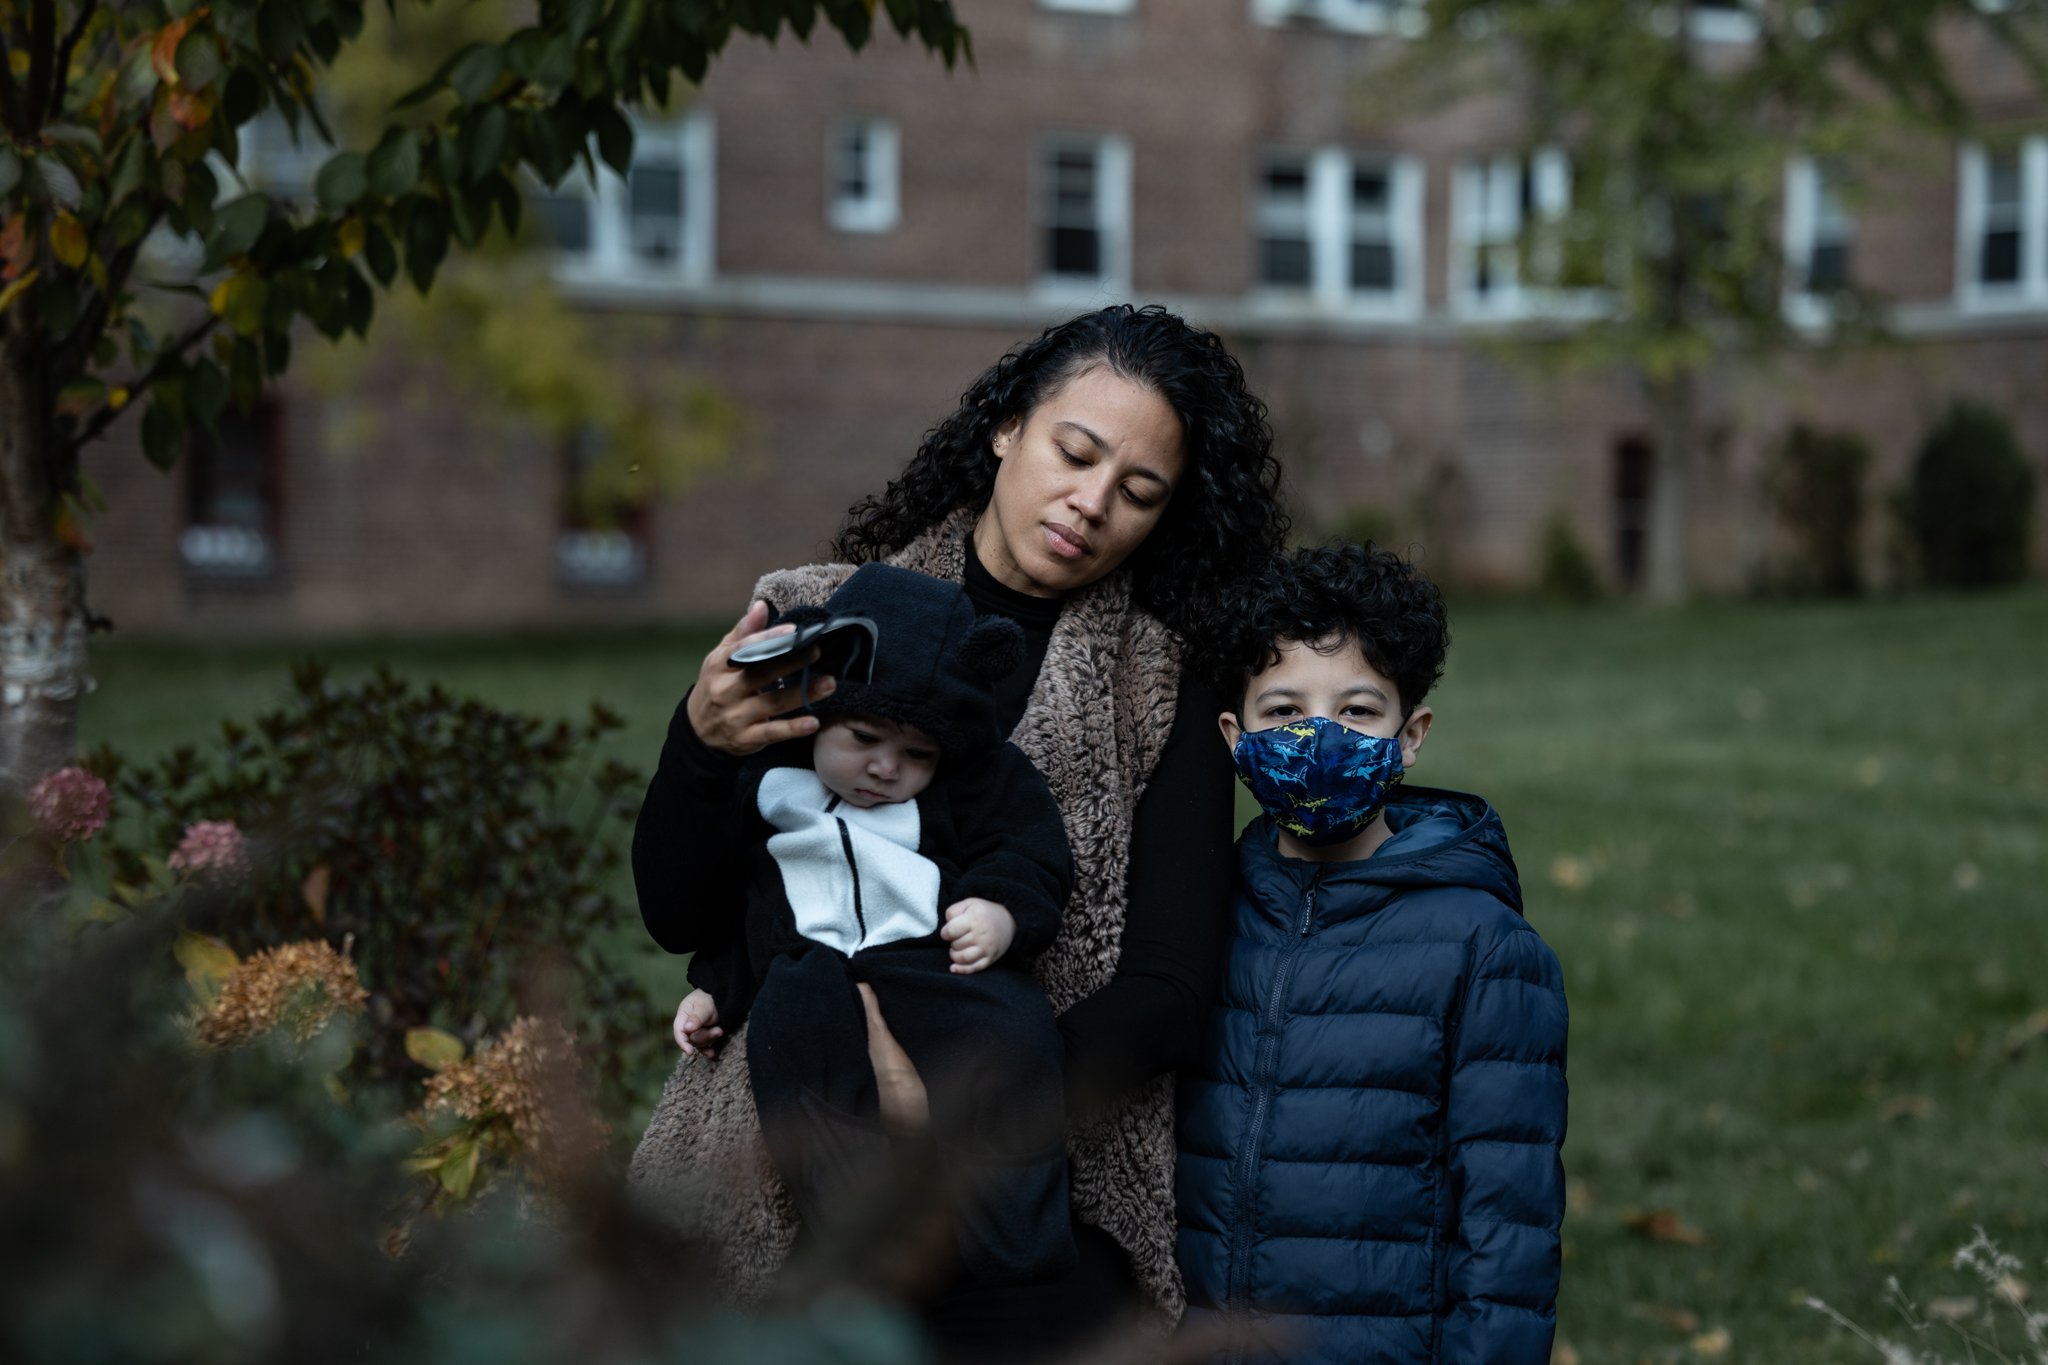  Viviana Echavarria a mom of four, in the North Riverdale section of the Bronx. She and her husband were among the New York City parents who didn’t feel safe for their children to return to in-person learning during the ongoing public health crisis a